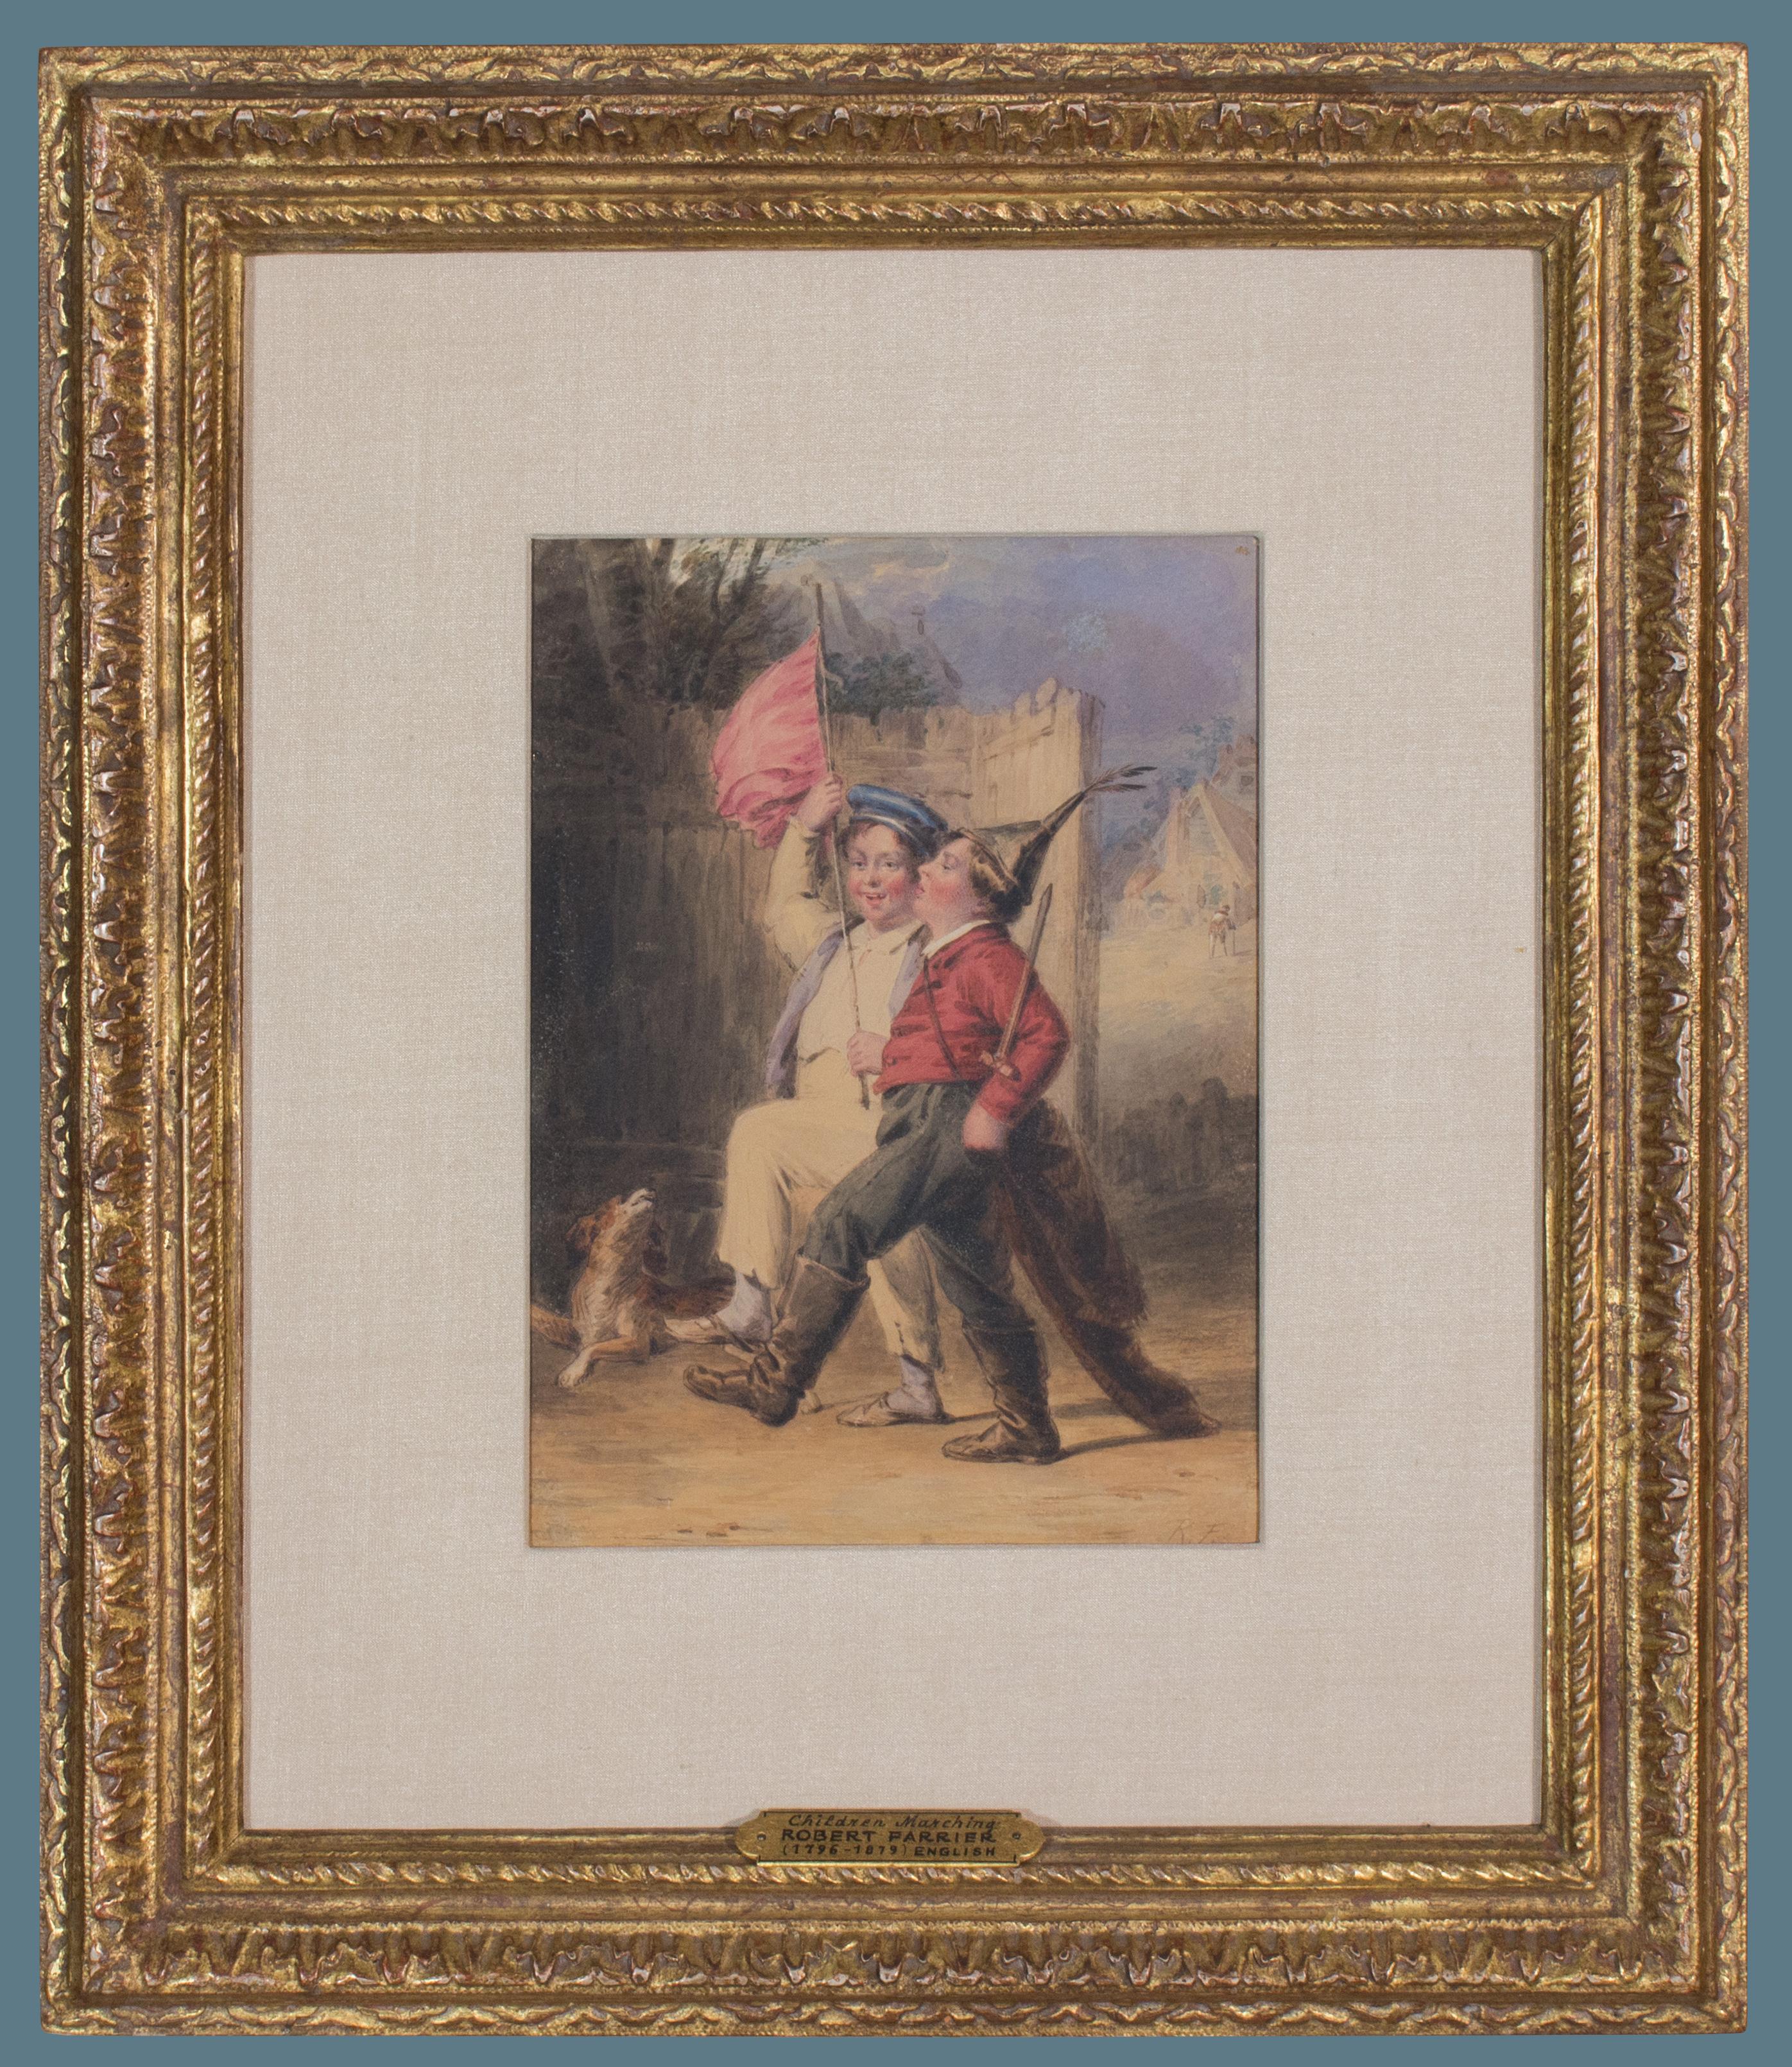 Robert Farrier
(English, 1796-1879)
Children Marching

Watercolor on paper, 9 x 6 1/2 inches
Signed at lower right: "R.F."

Robert Farrier exhibited regularly at the Royal Academy beginning in 1818. His work is represented in the collection of the